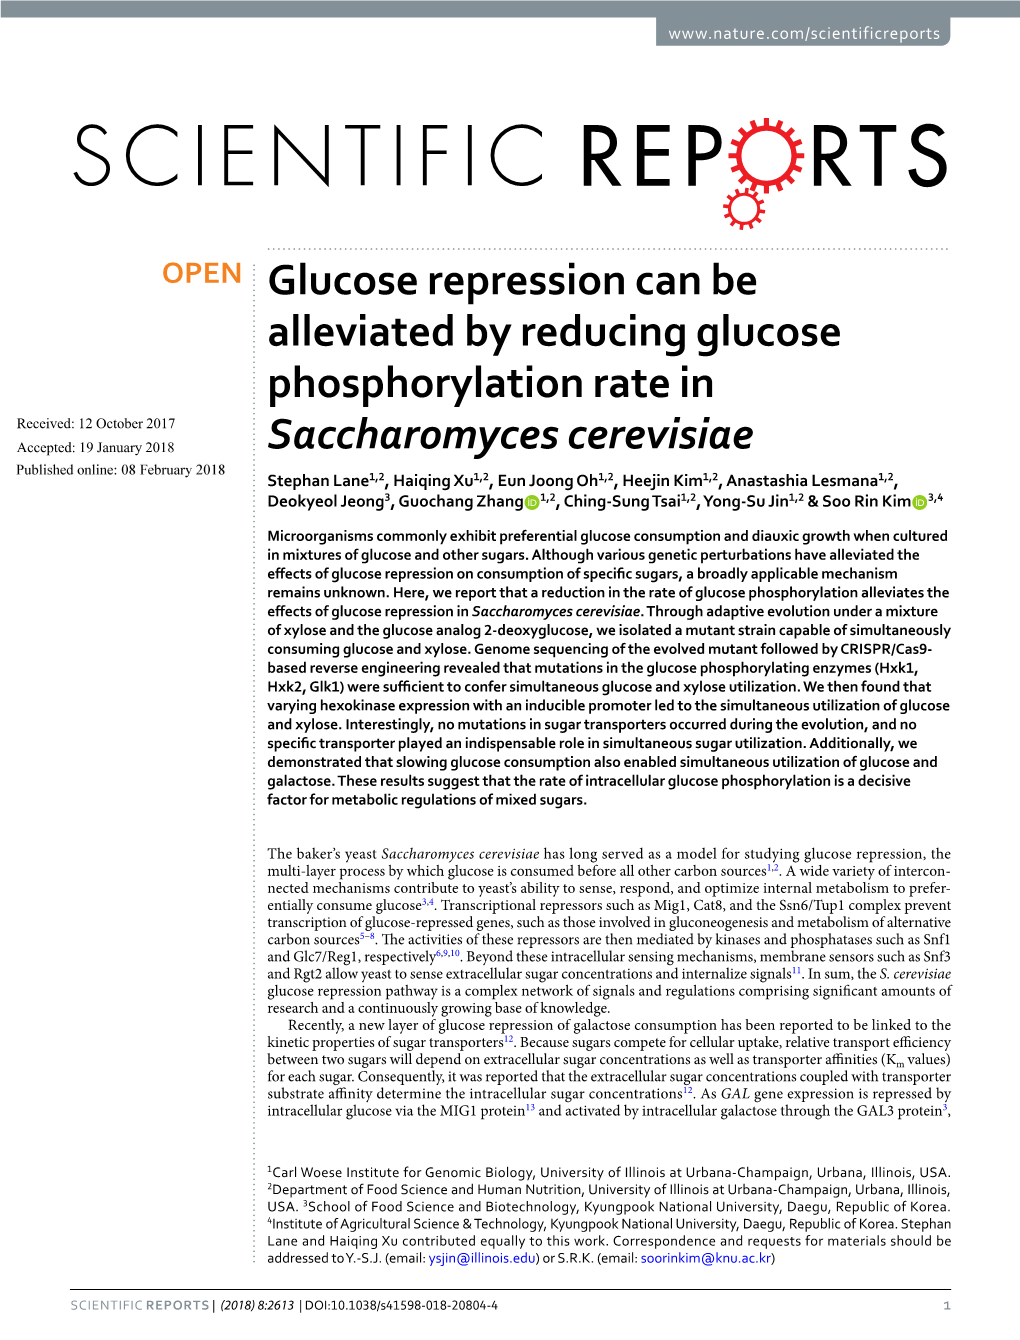 Glucose Repression Can Be Alleviated by Reducing Glucose